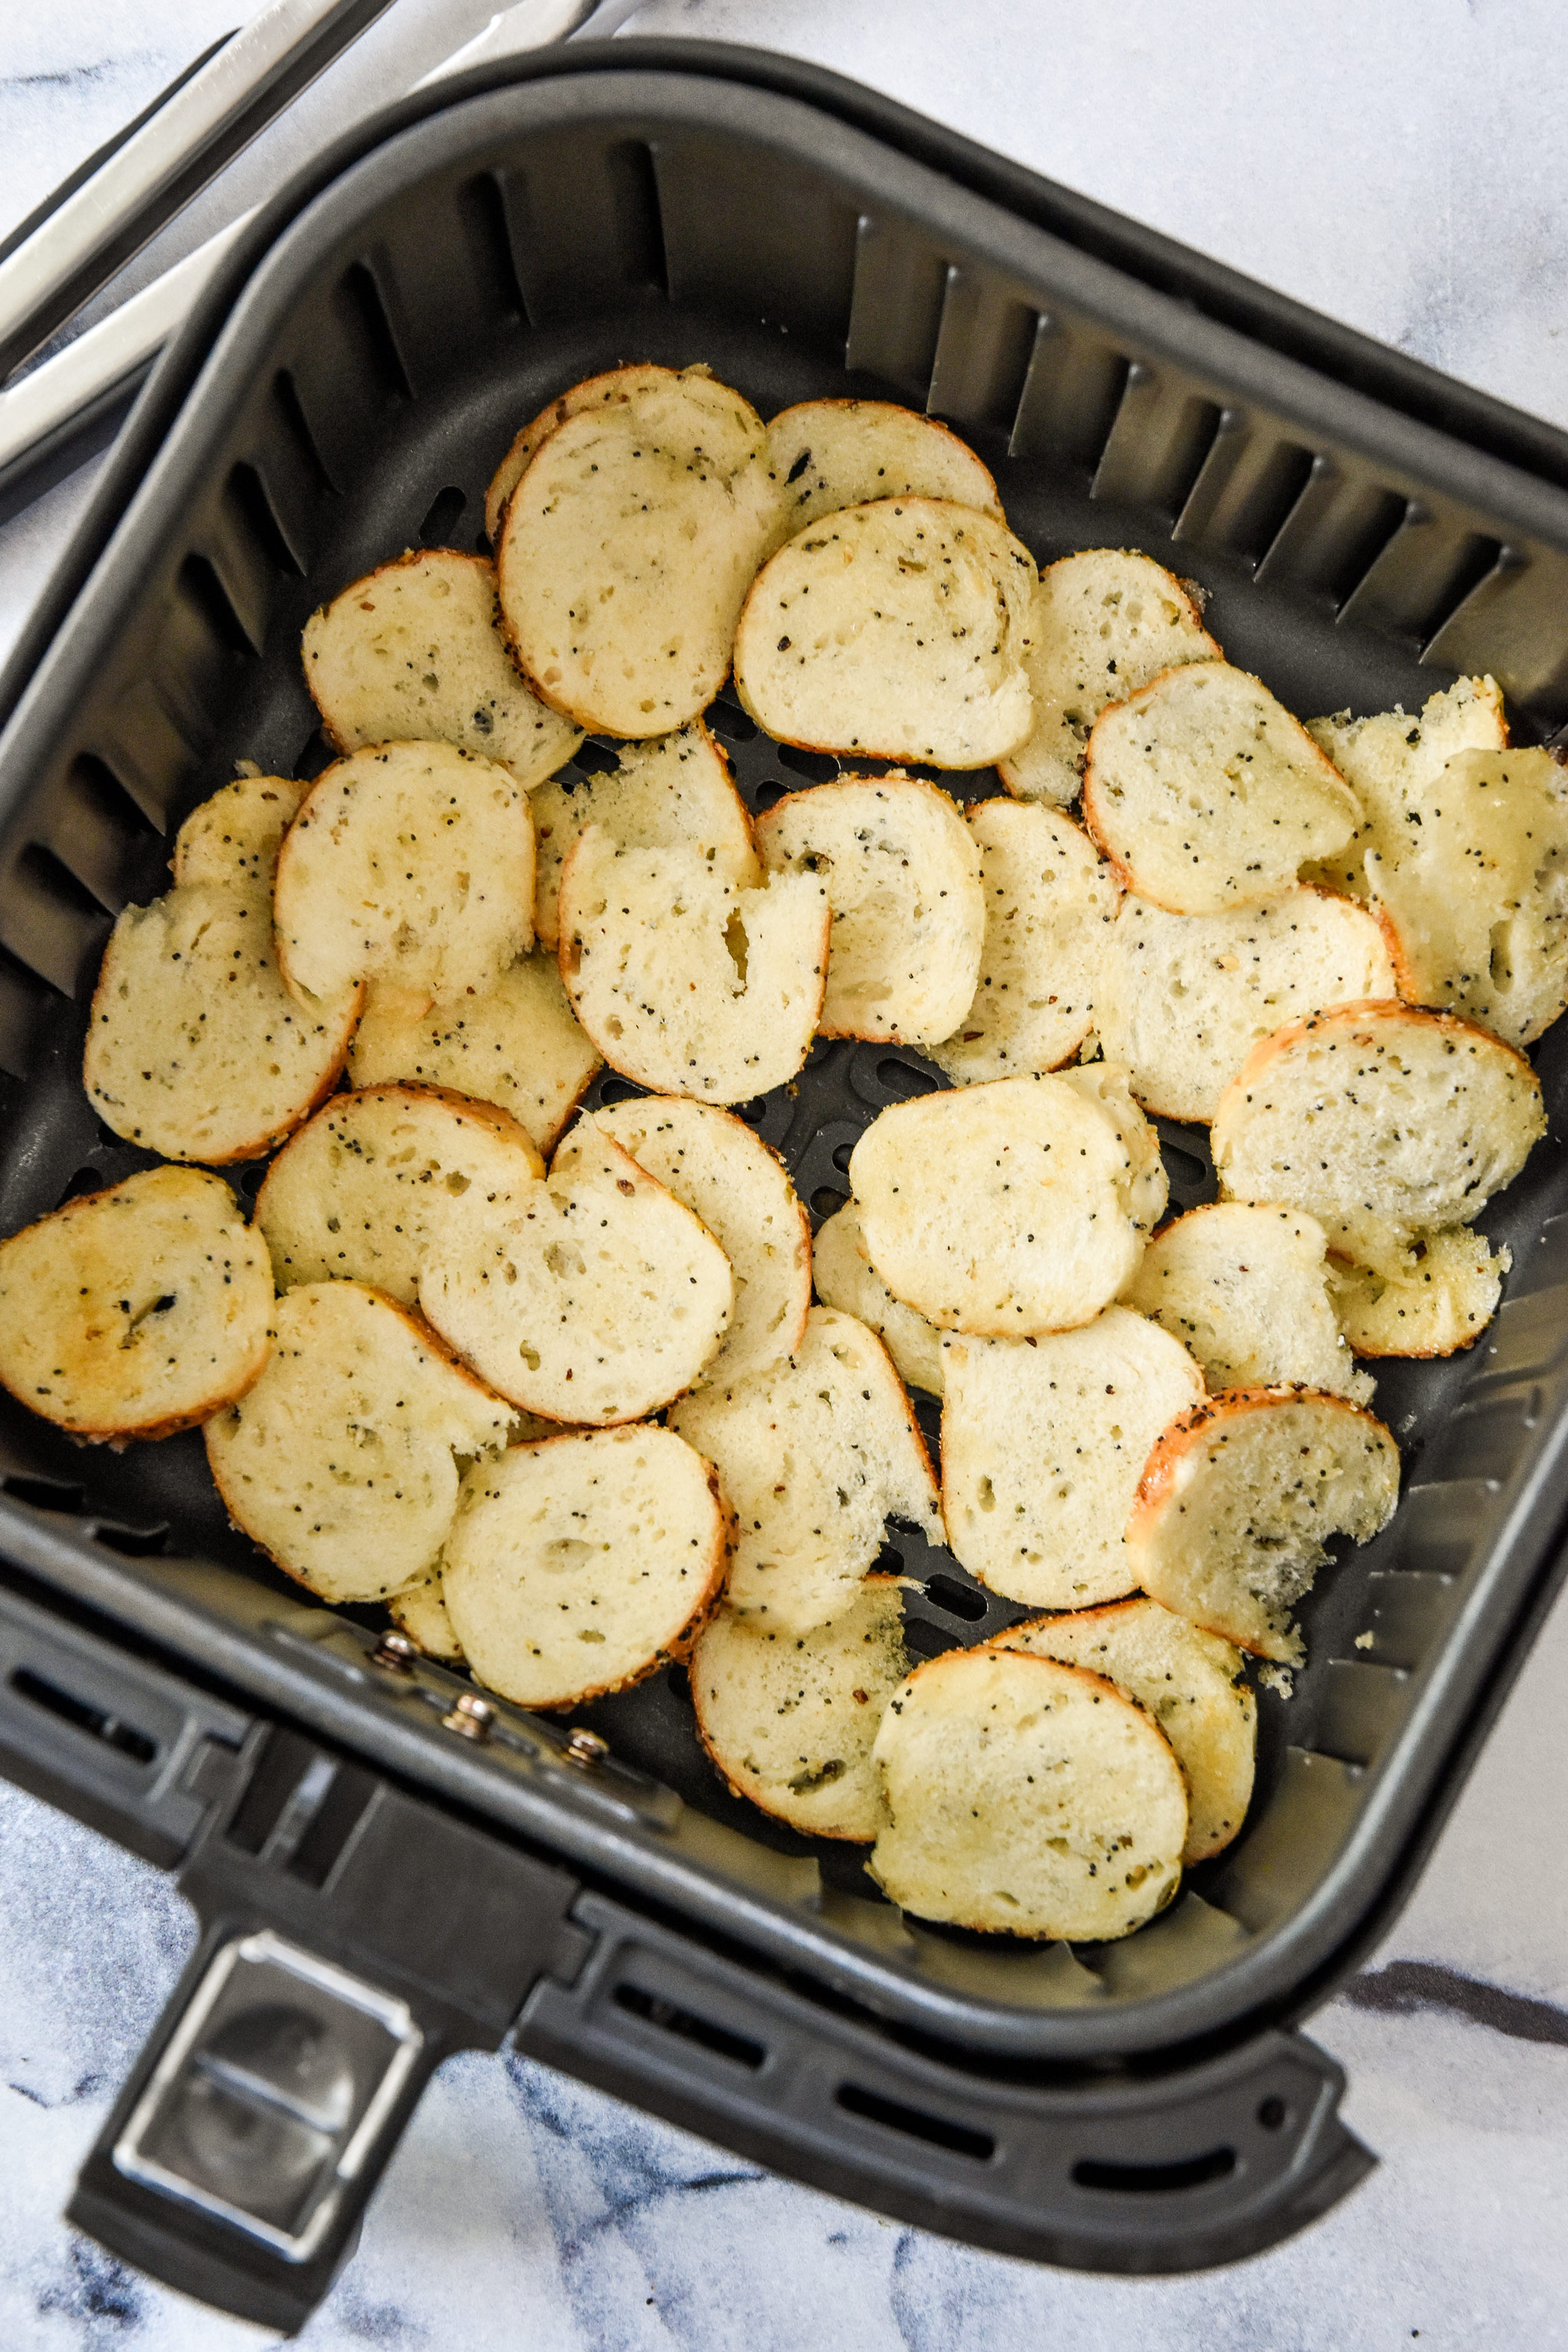 uncooked bagel chips in the air fryer basket ready to be cooked.